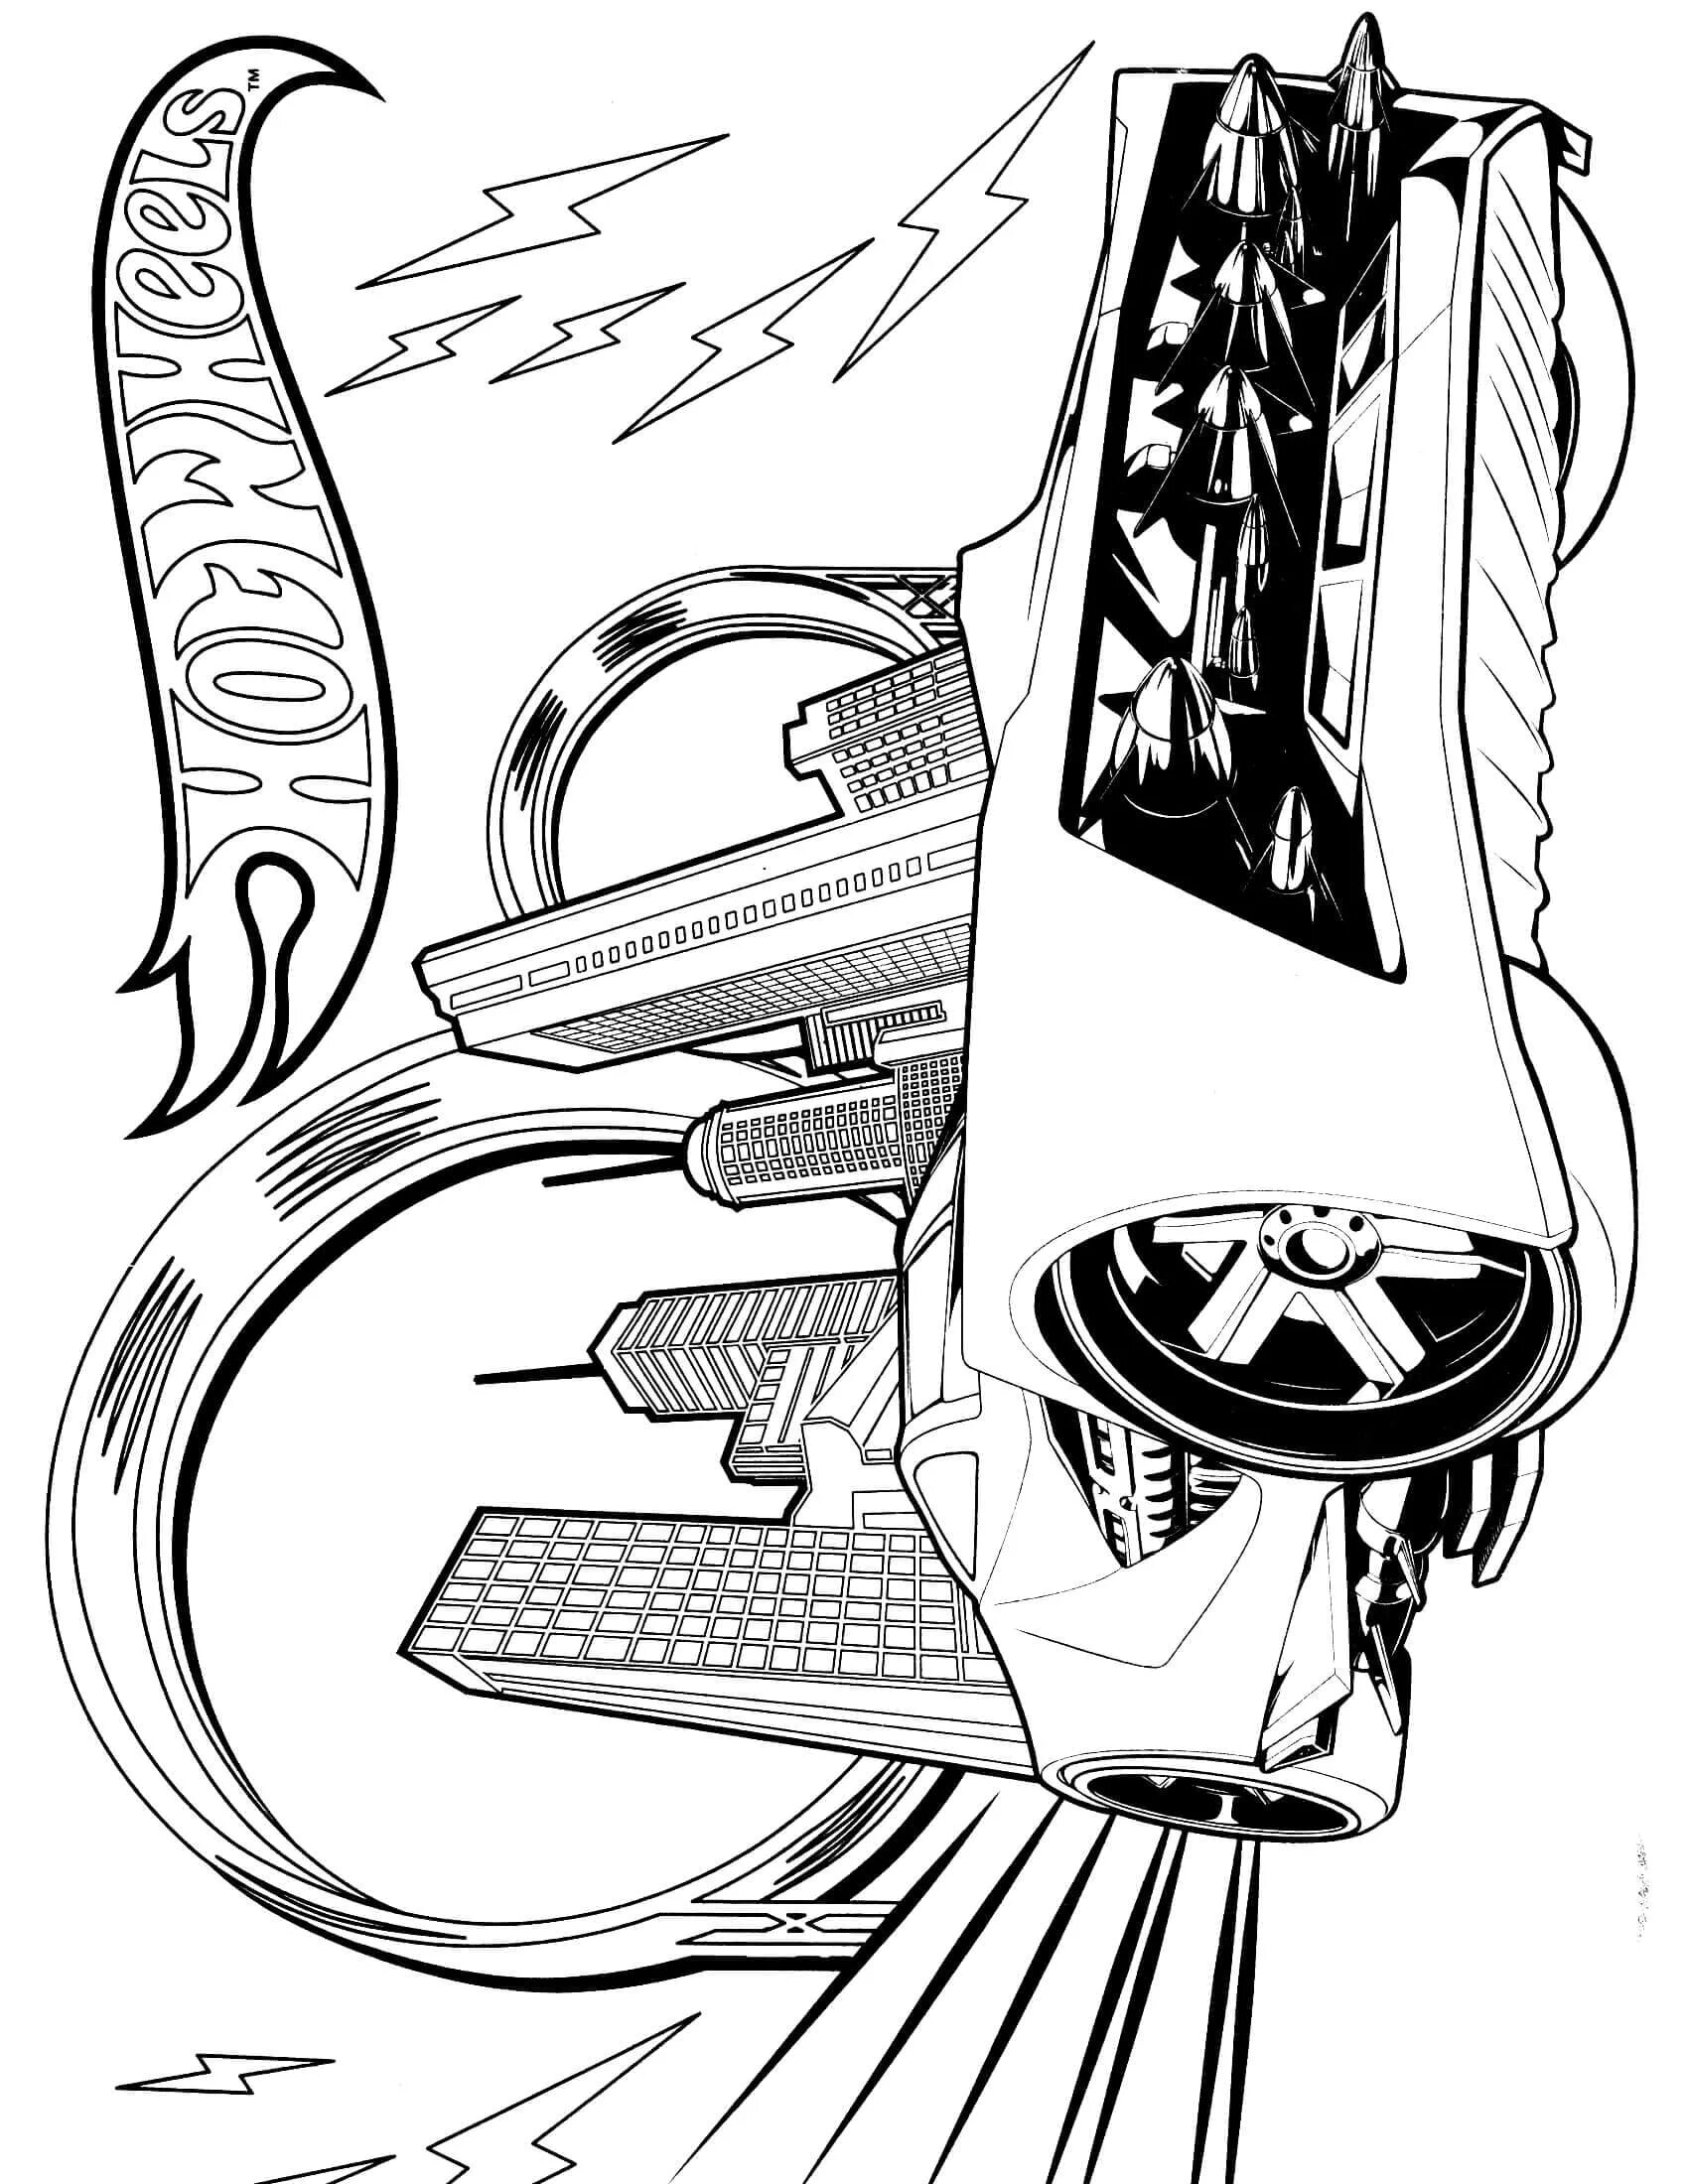 Impressive hot wheels coloring page